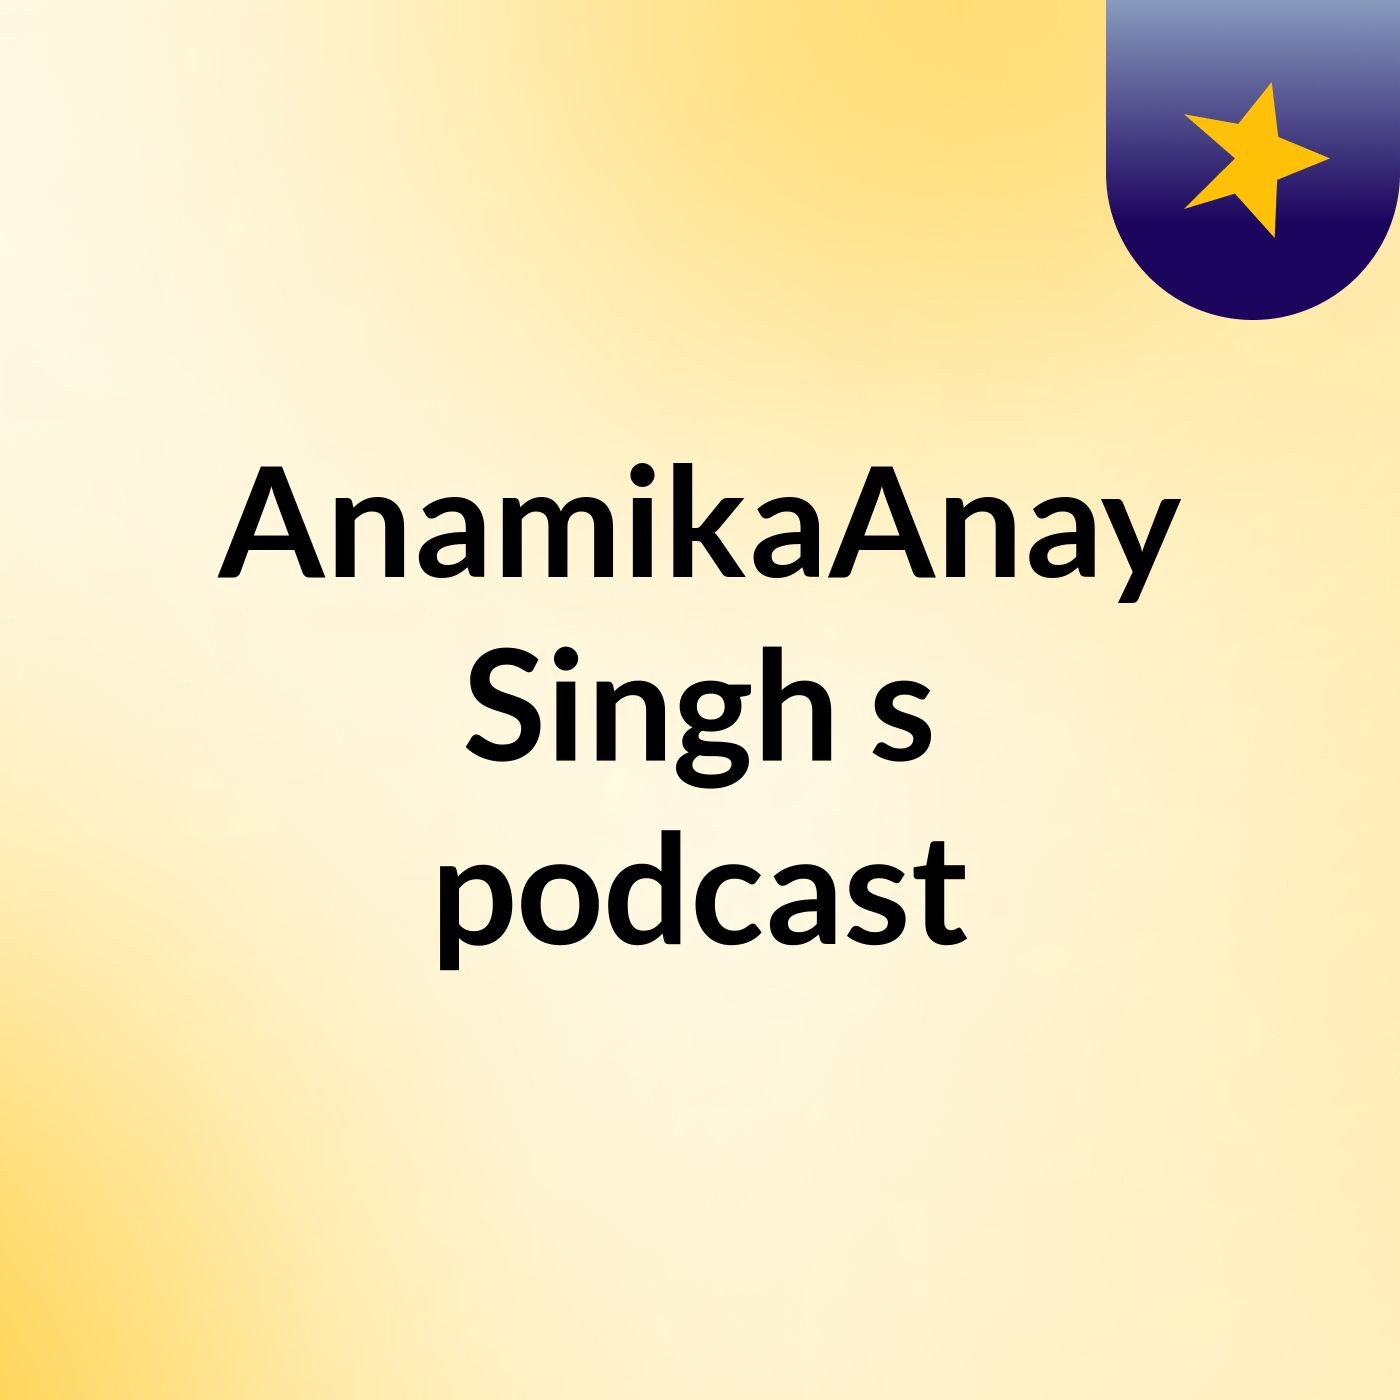 Episode 4 - AnamikaAnay Singh's podcast